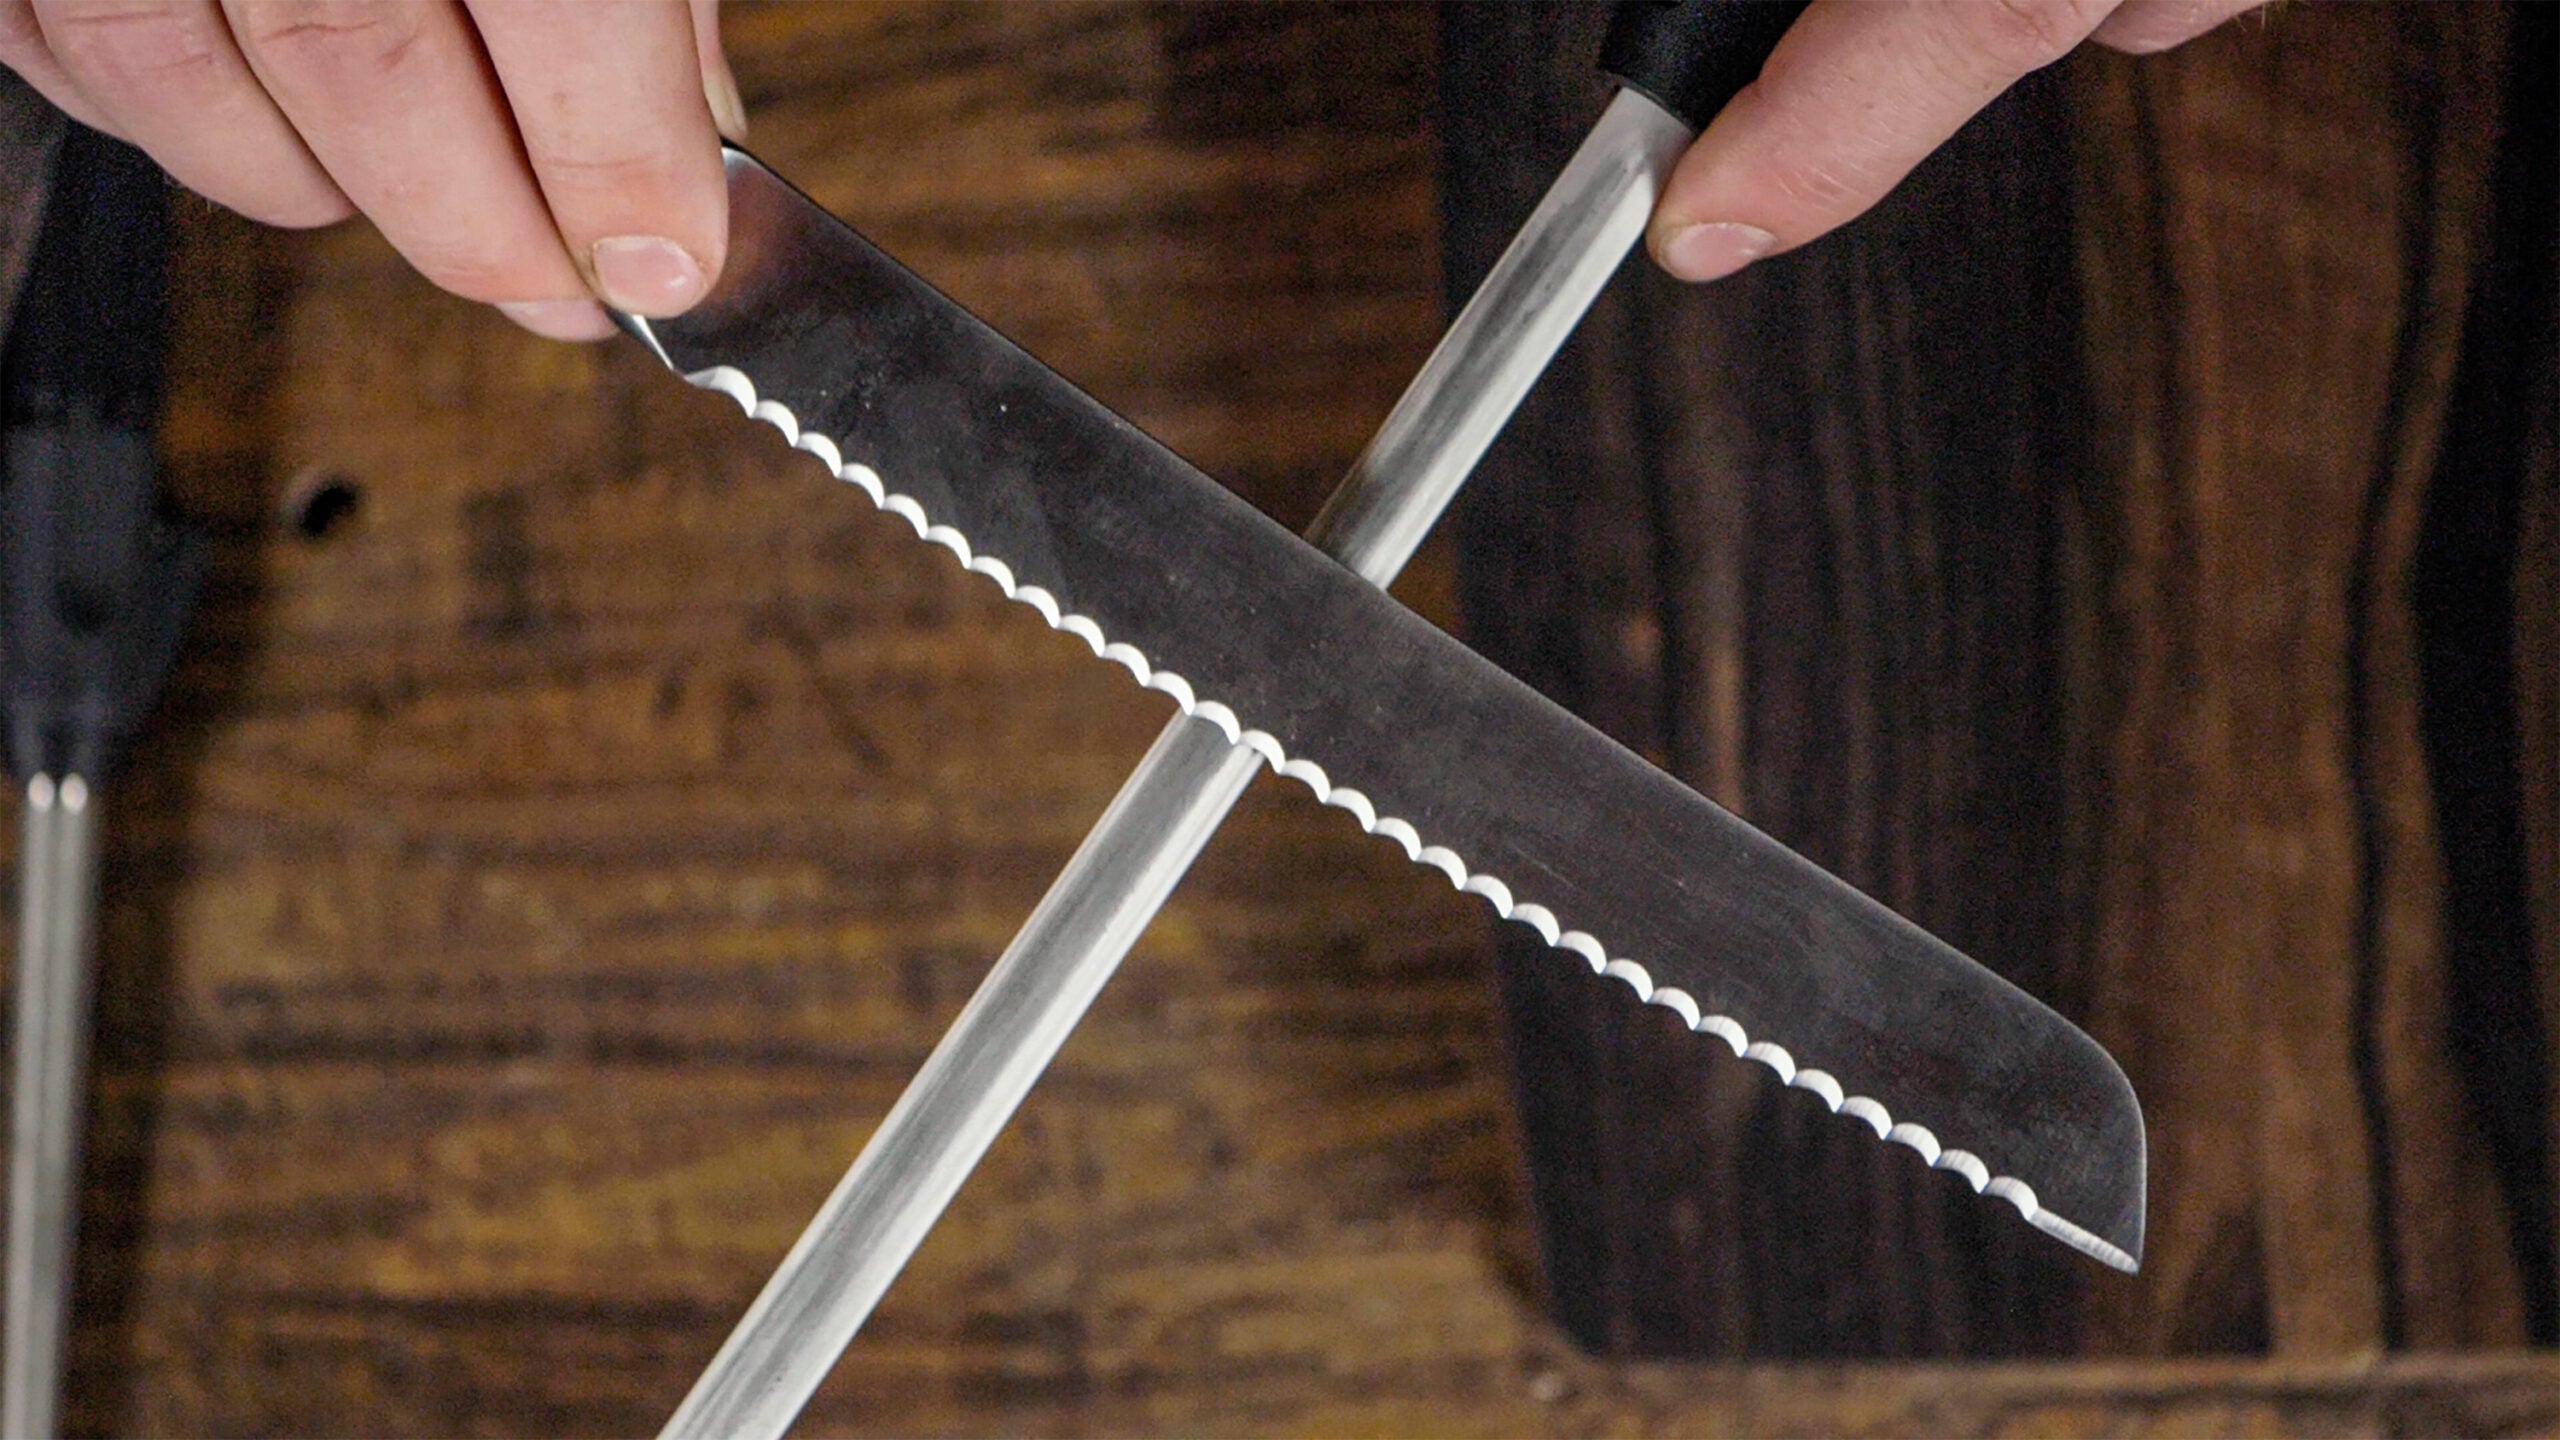 How To Sharpen A Knife Without A Sharpener